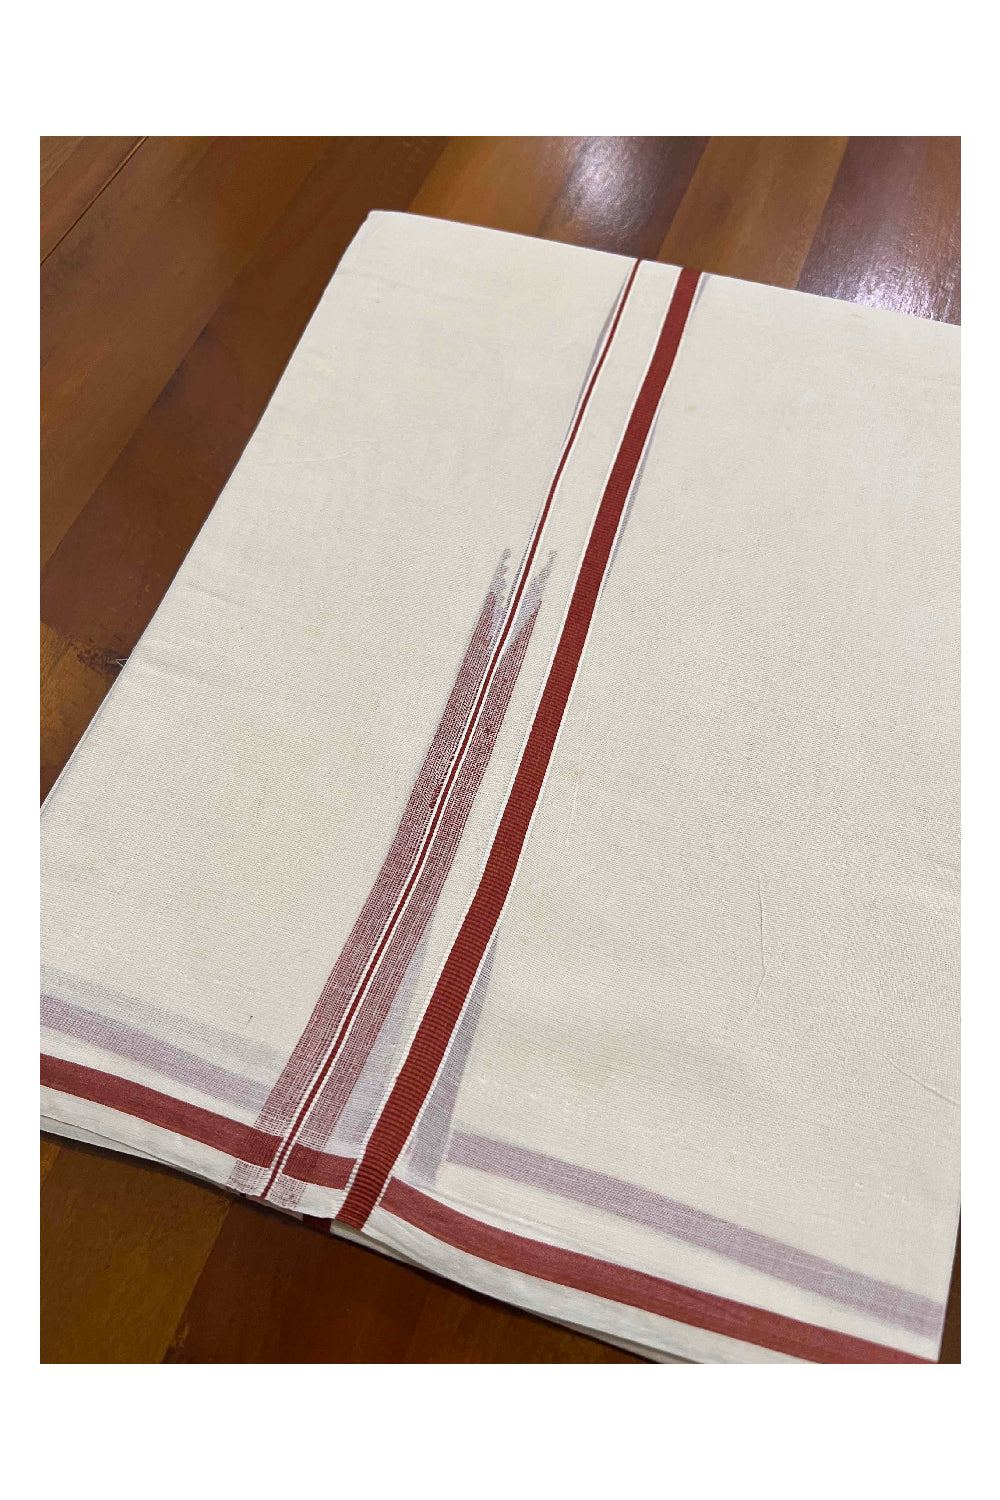 Off White Pure Cotton Double Mundu with Brick Red Puliyilakkara Border (South Indian Dhoti)